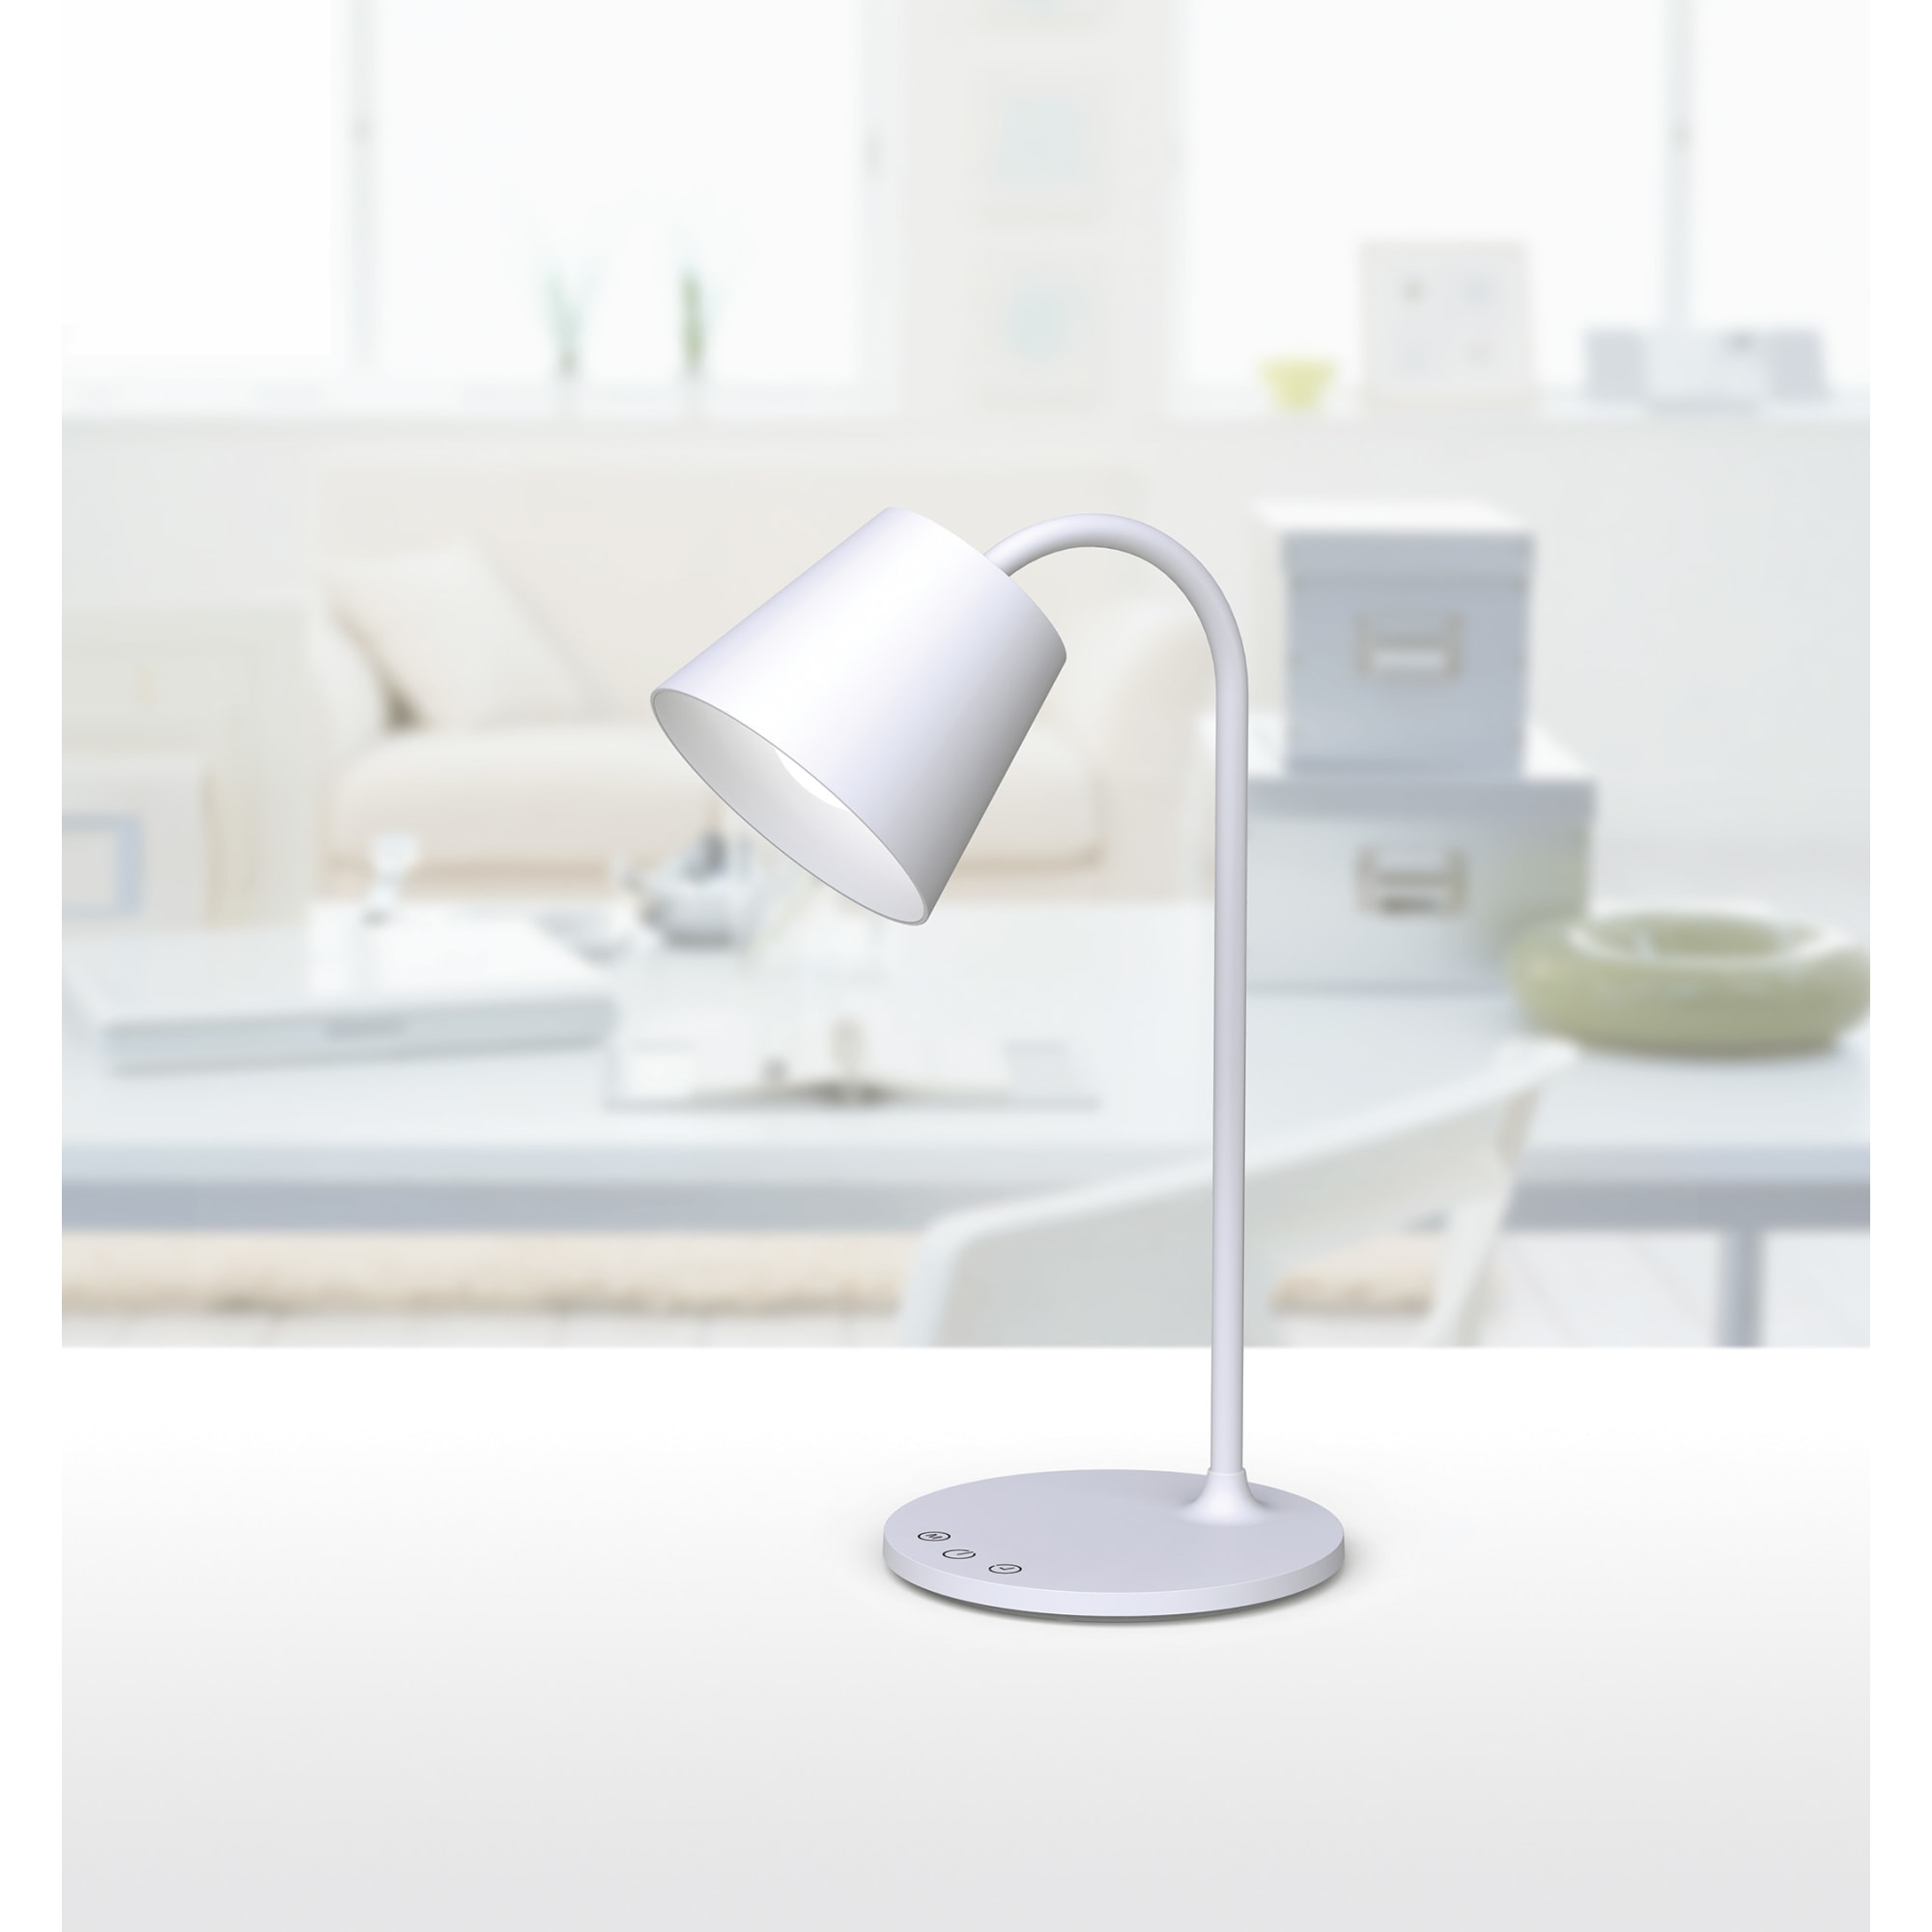 Realspace™ Kessly LED Desk Lamp With USB Port, 17"H, White - image 2 of 7